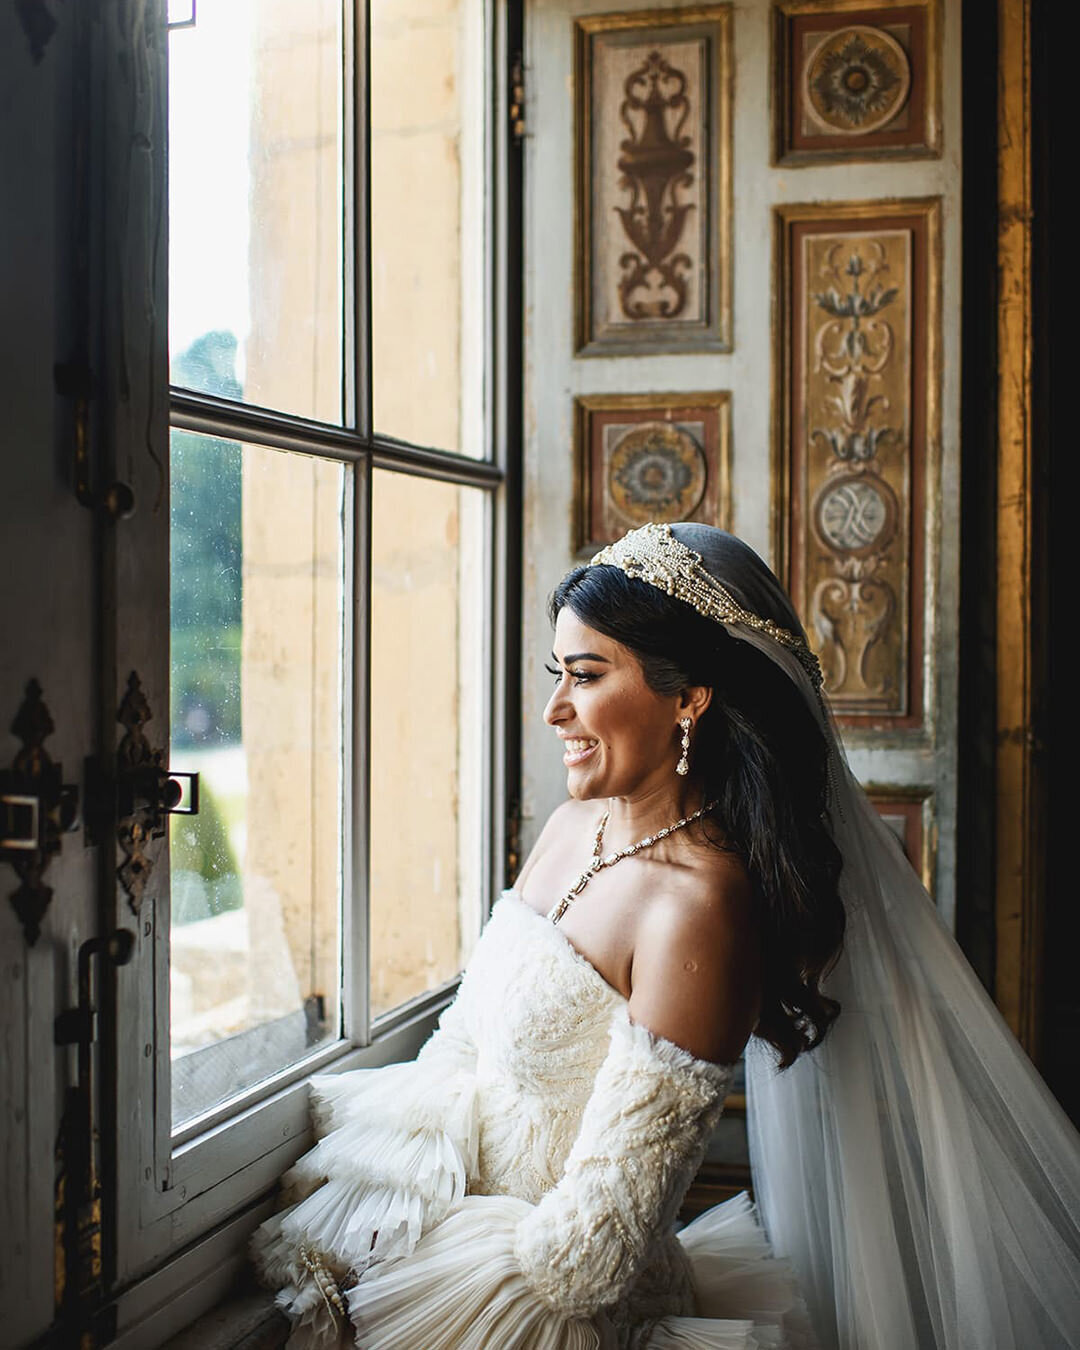 Bride wearing ornate wedding gown with large sleeves